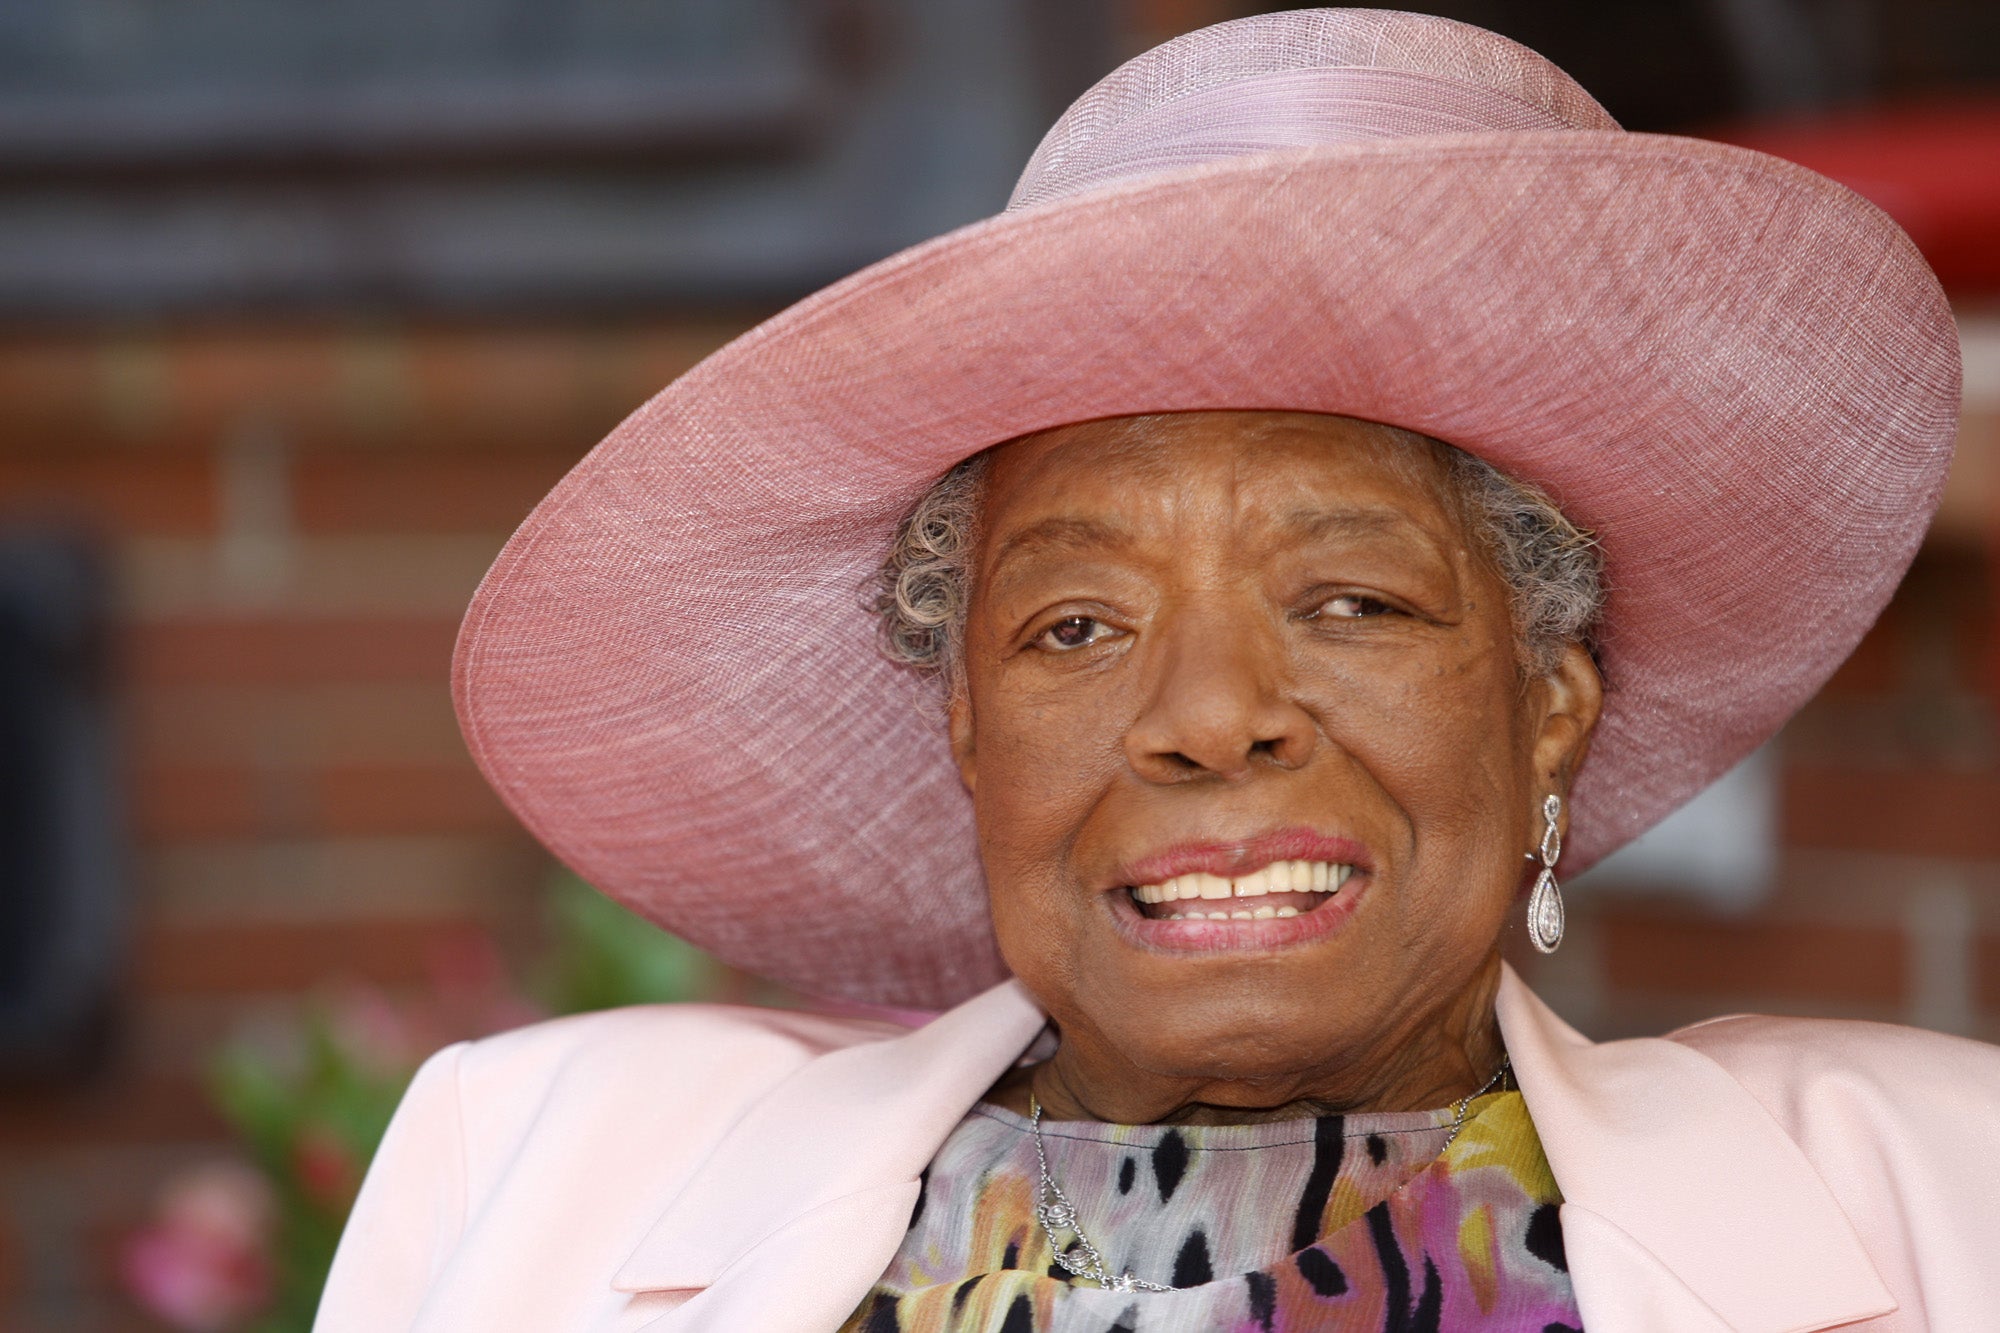 Maya Angelou Recovering from a Three-Day Hospital Stay